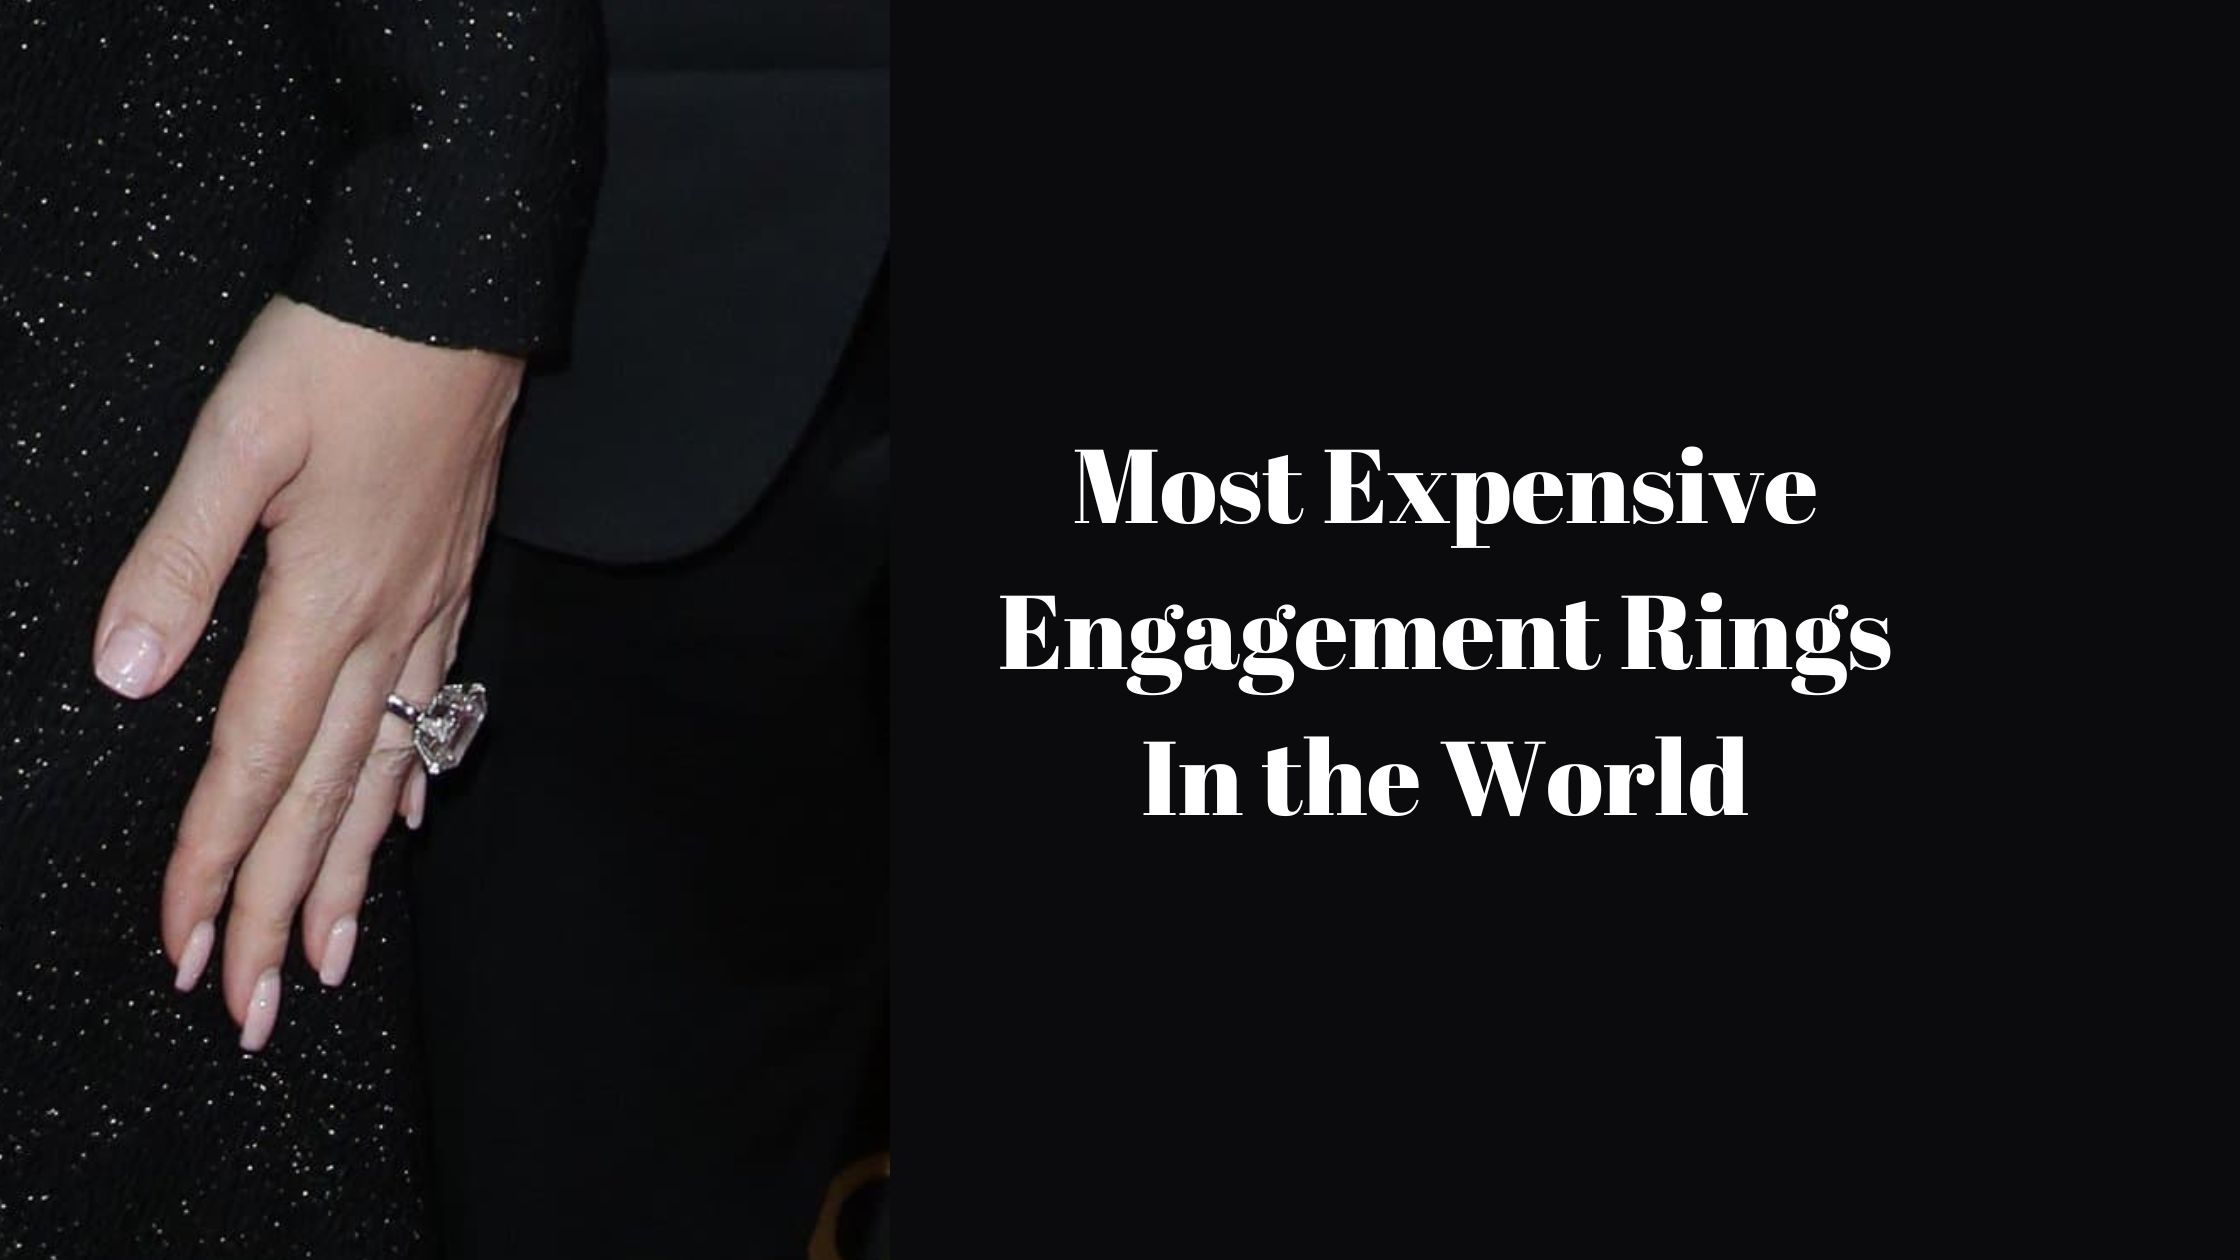 Most Expensive Engagement Rings In the World